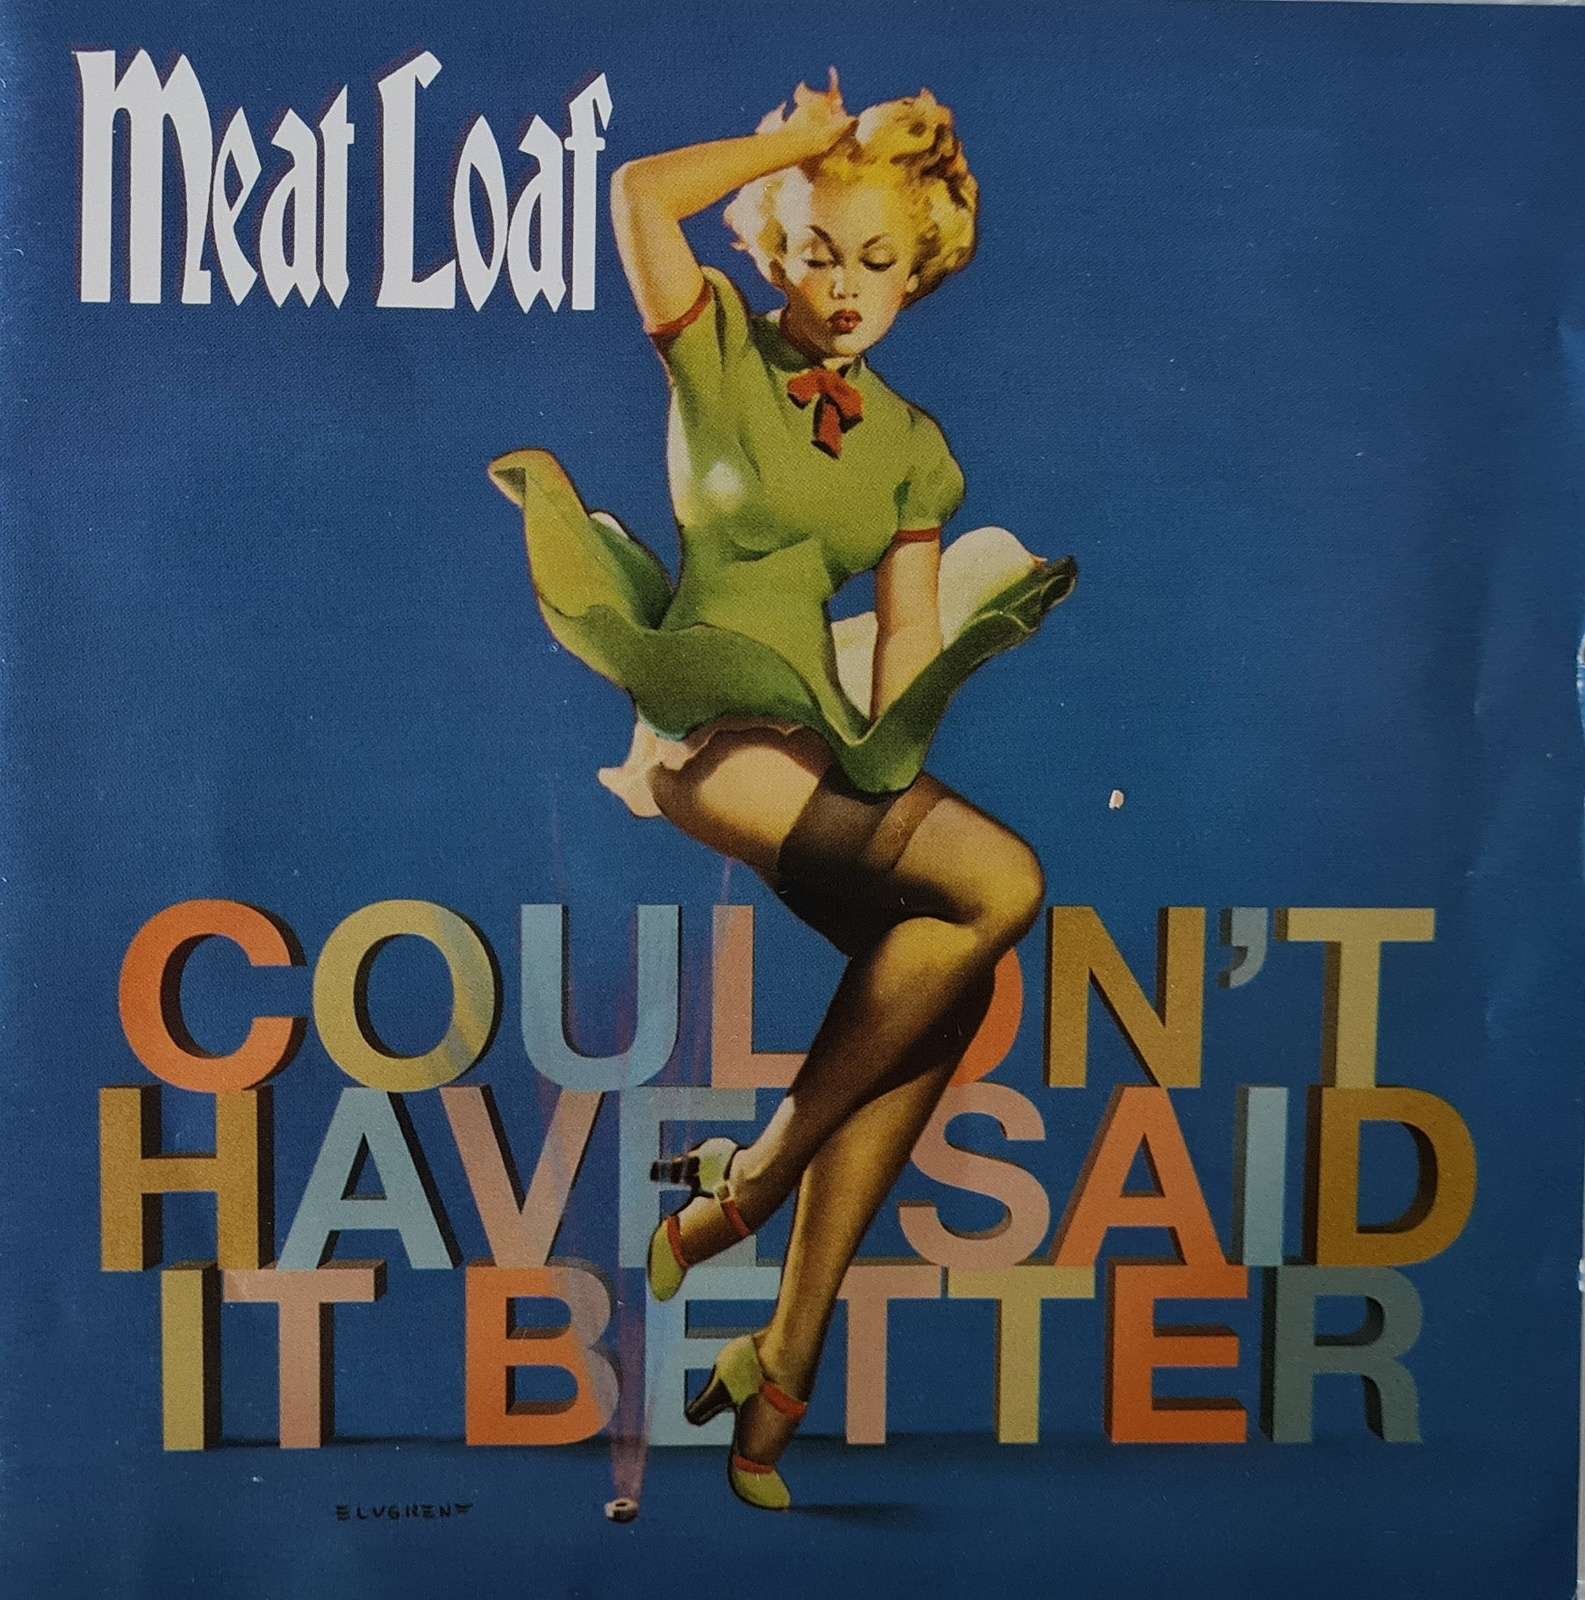 Meat Loaf - Couldn't Have Said it Better (CD)